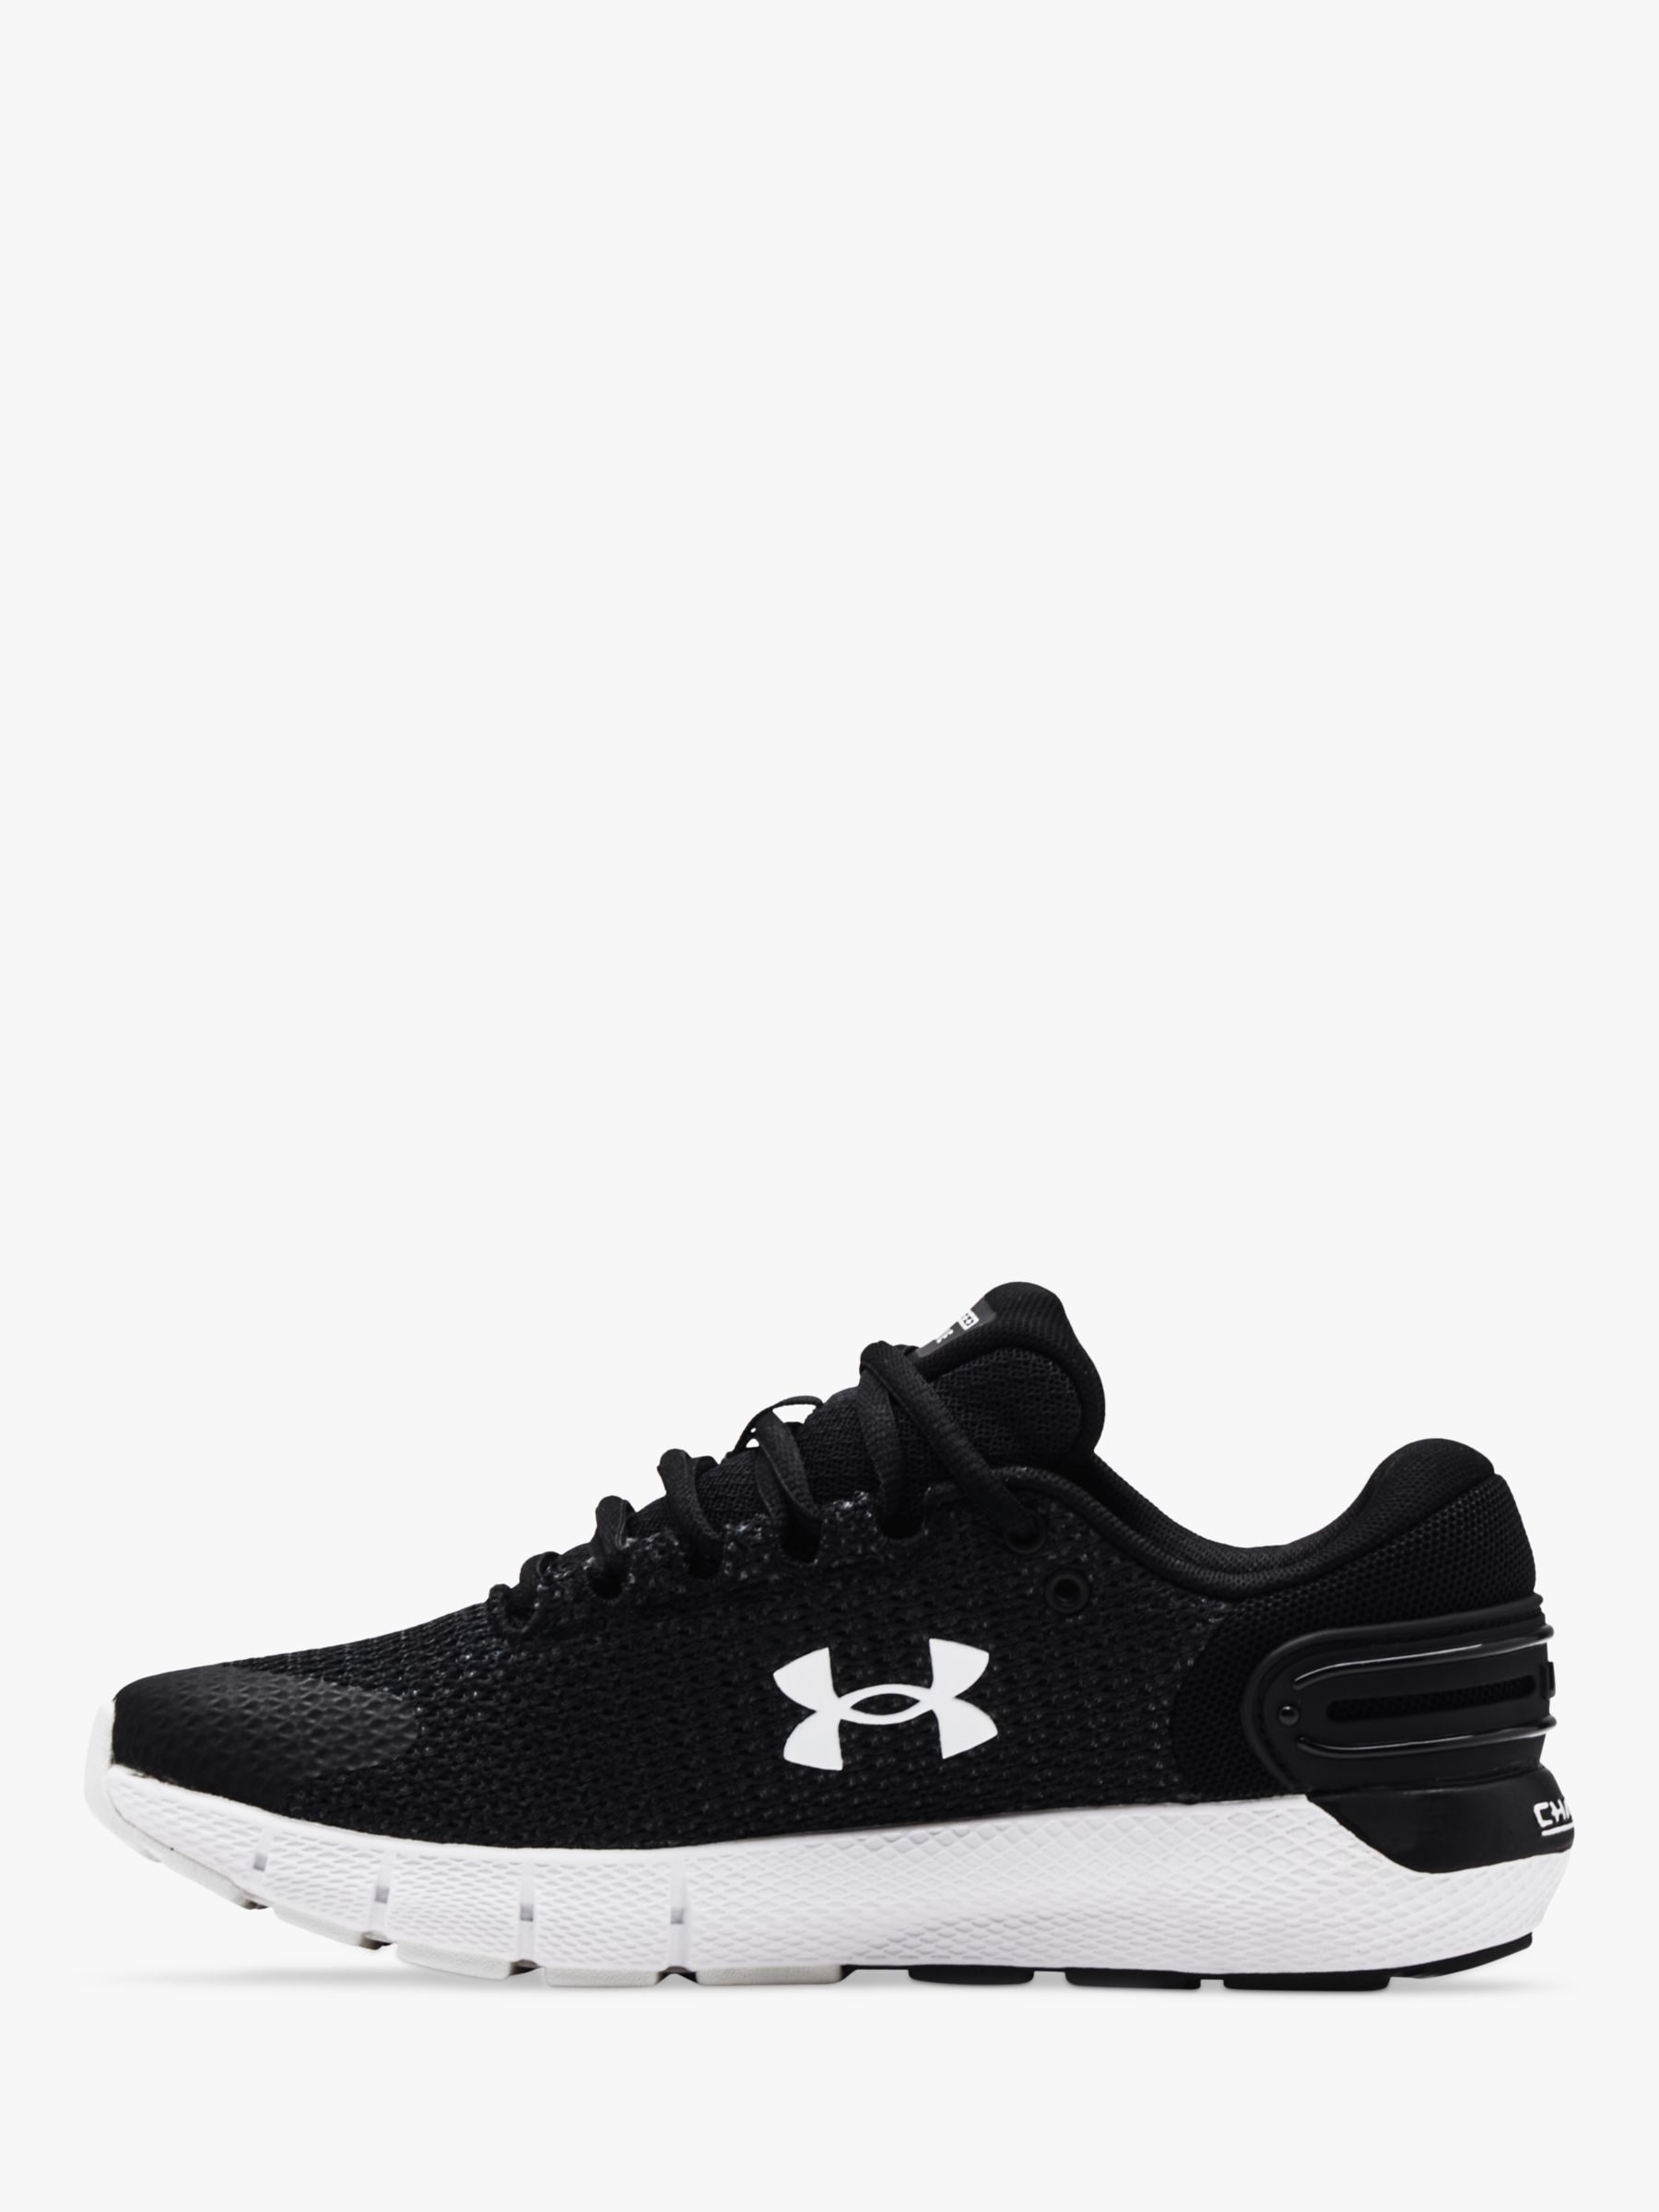 Under Armour Charged Rogue 2.5 Women's Running Shoes, Black/White at ...